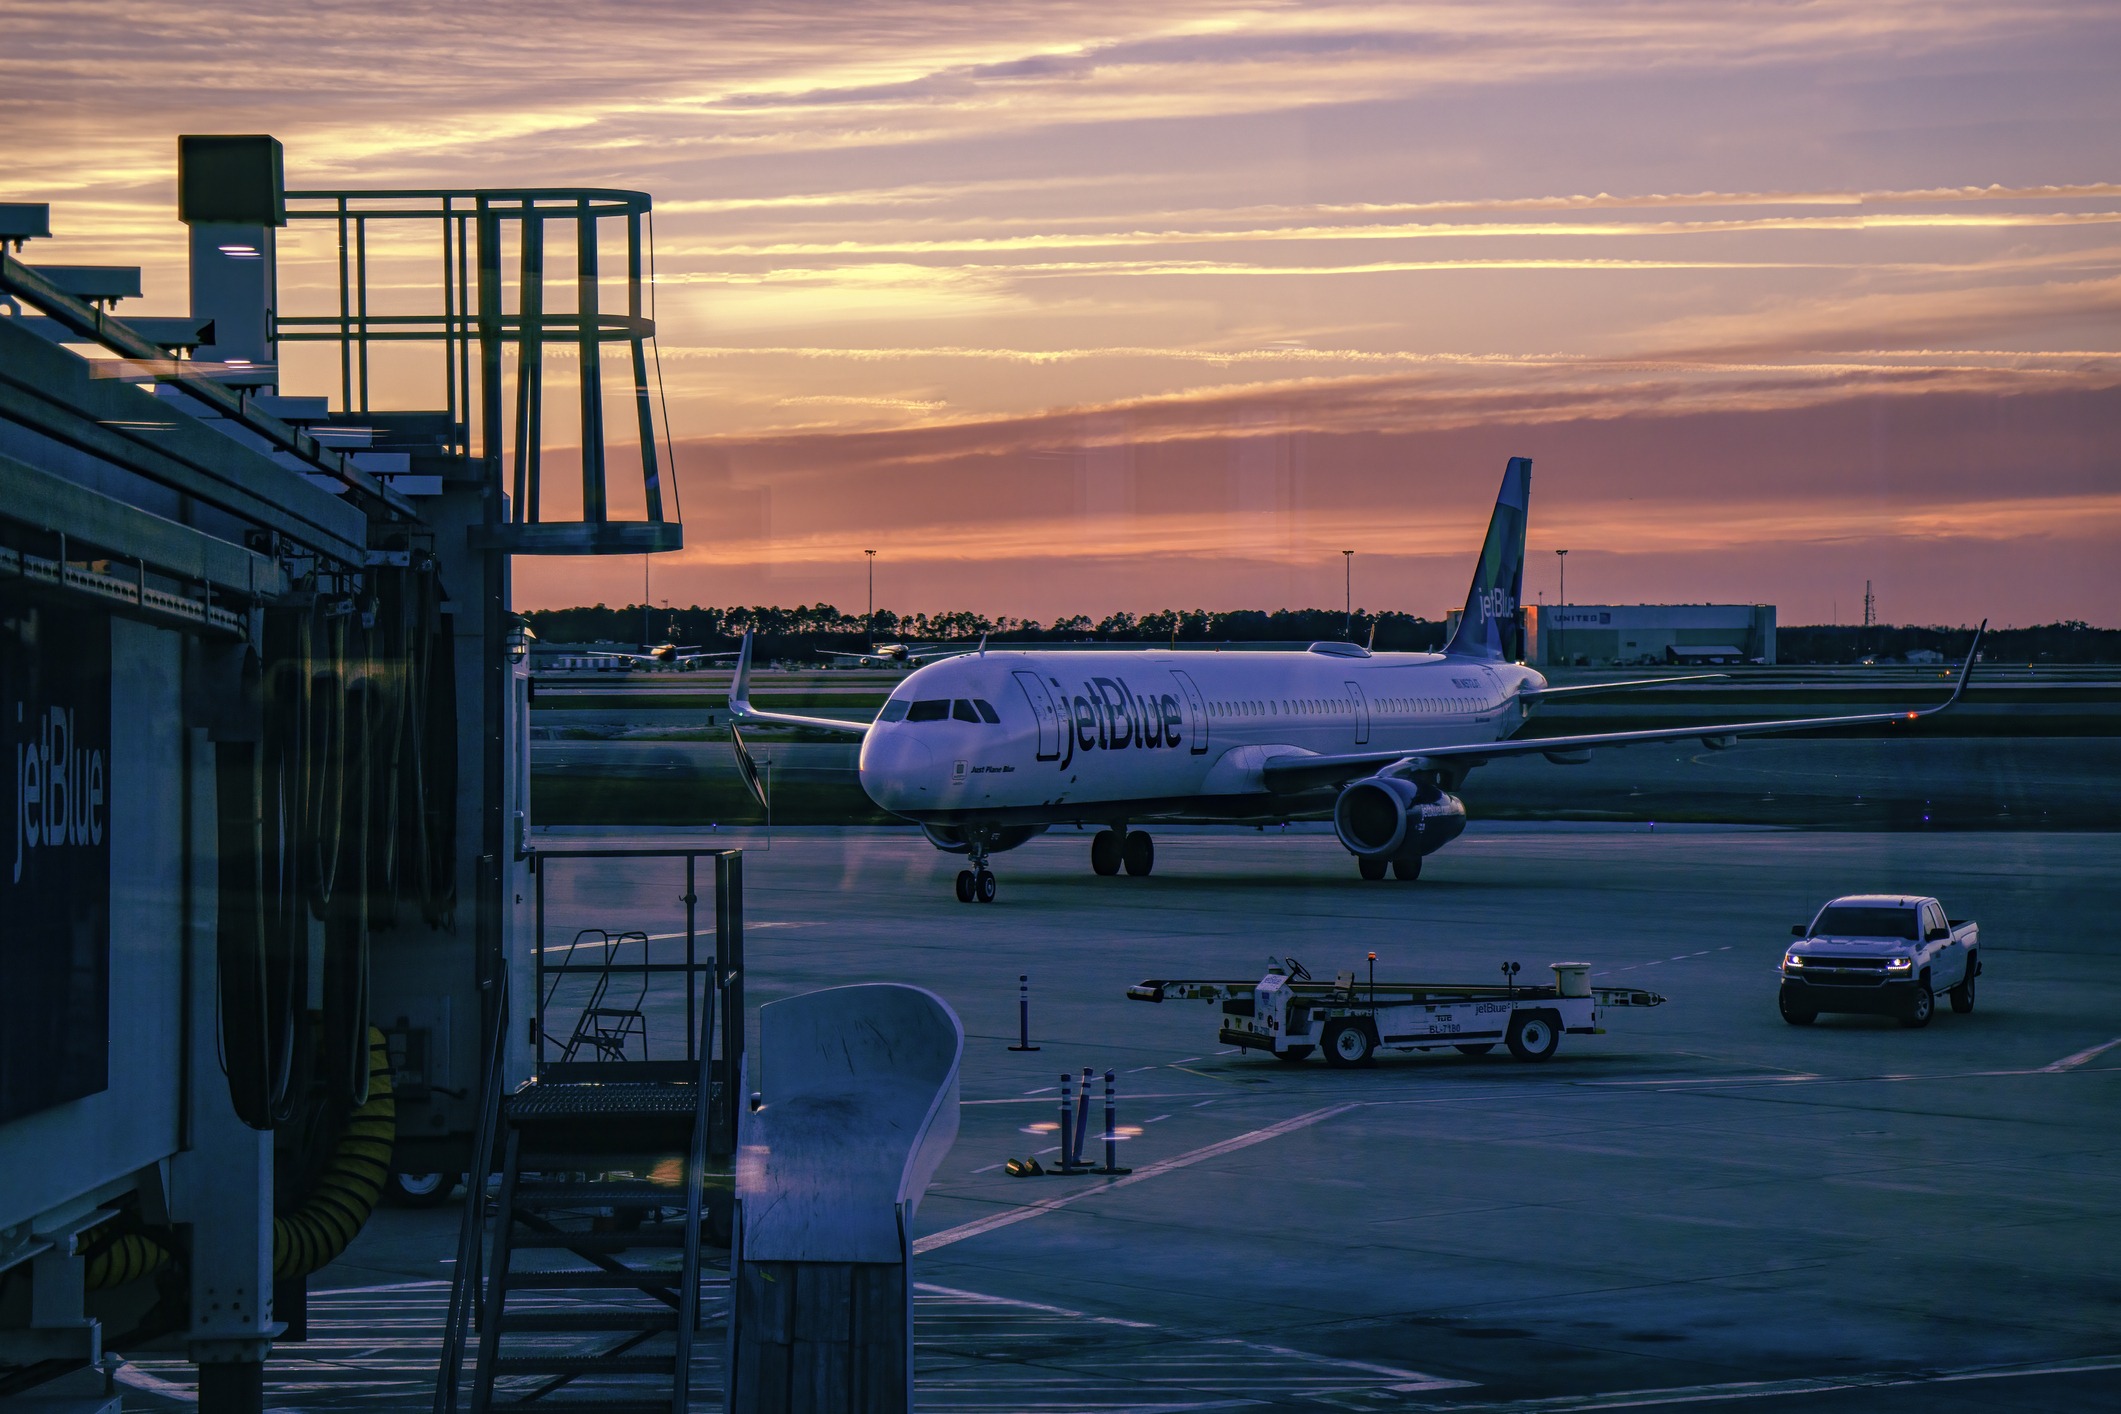 A jetBlue plane on the runway at sunset.